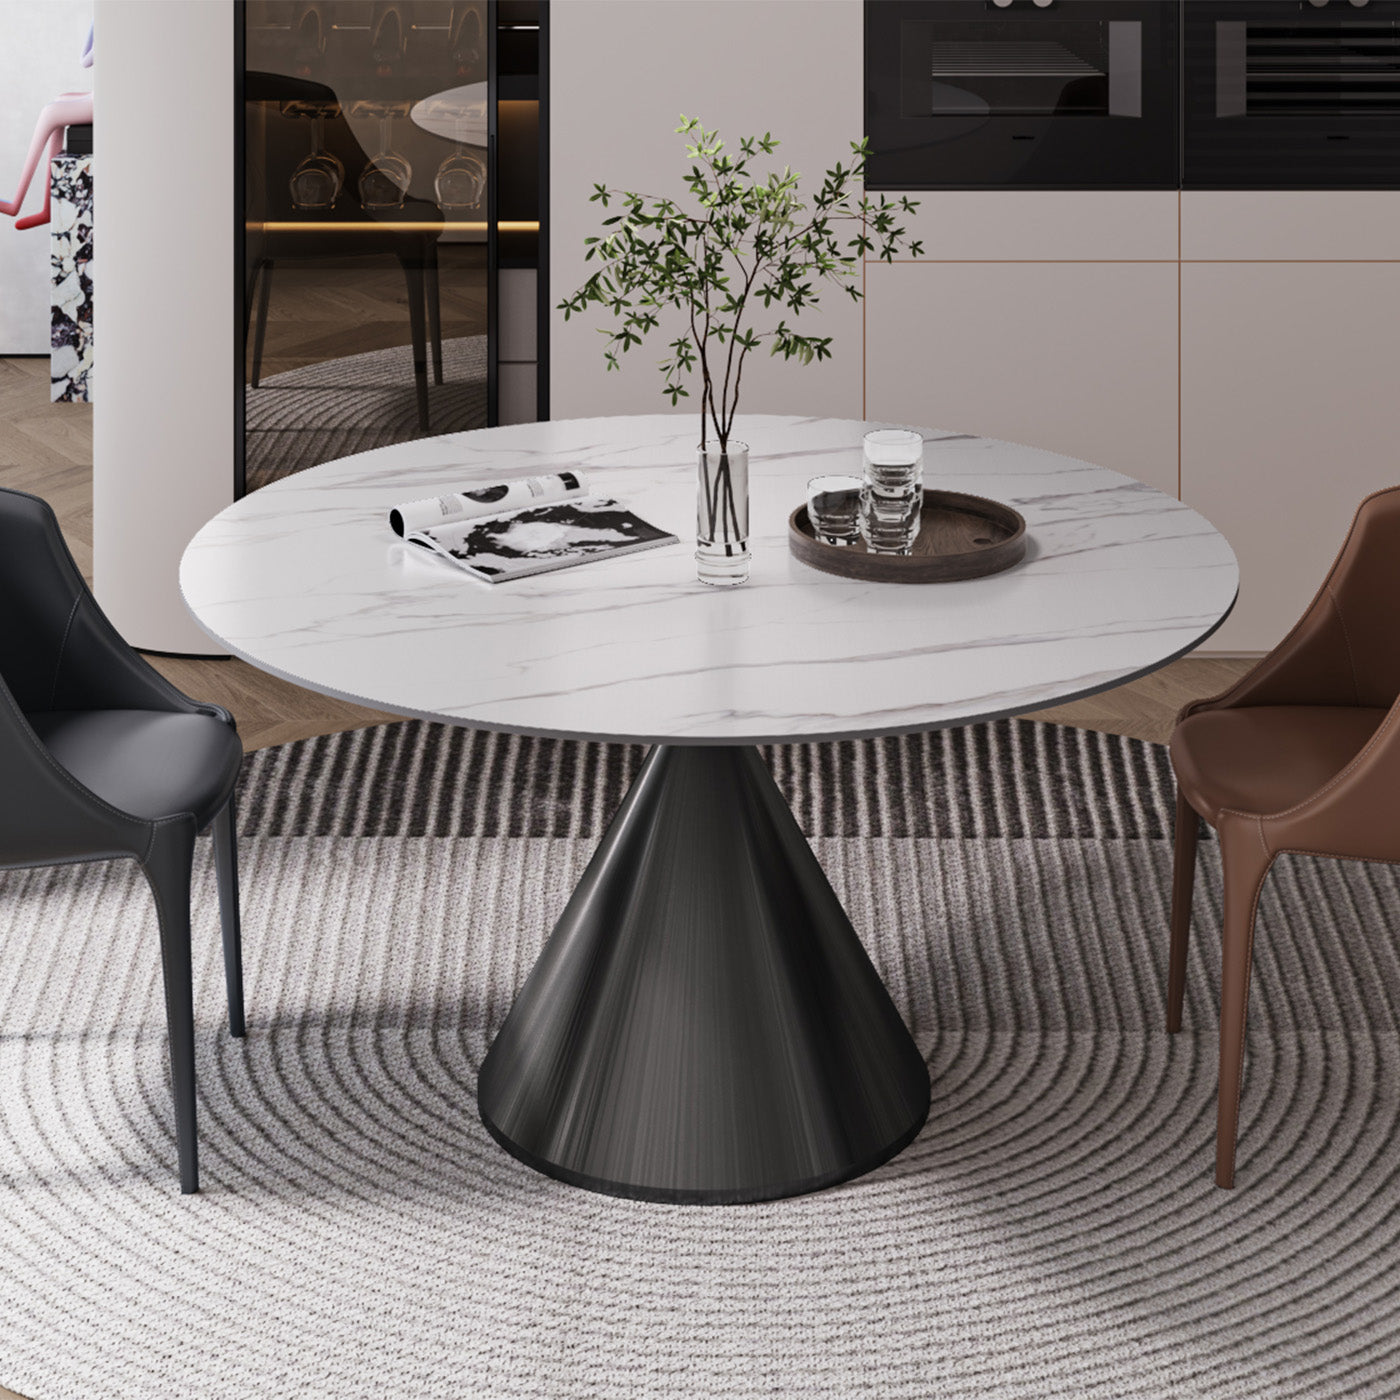 Modern White Round Dining Table for 4-6 with Sintered Stone Tabletop, Hourglass-shaped Design Gun Black Stainless Base